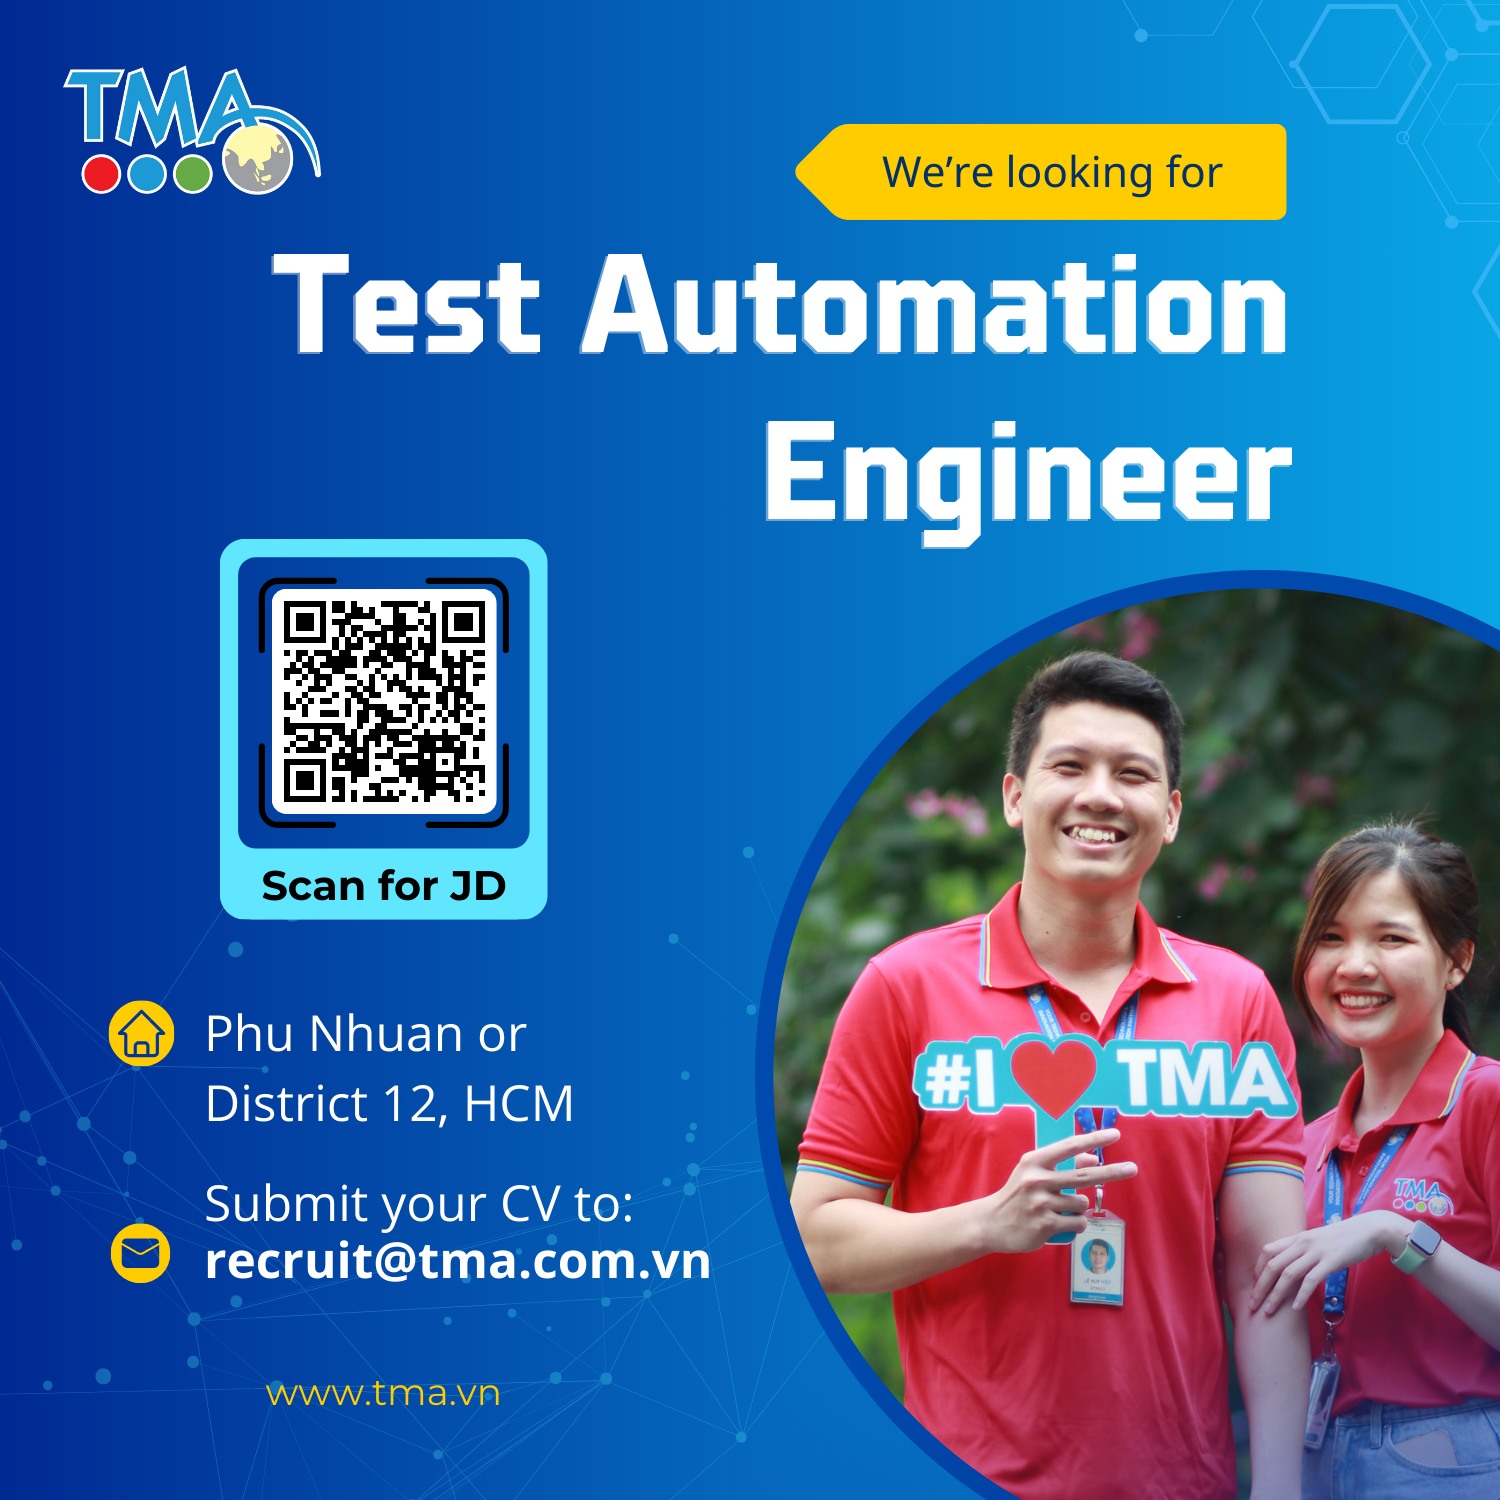 TMA Solutions is looking for Test Automation Engineer